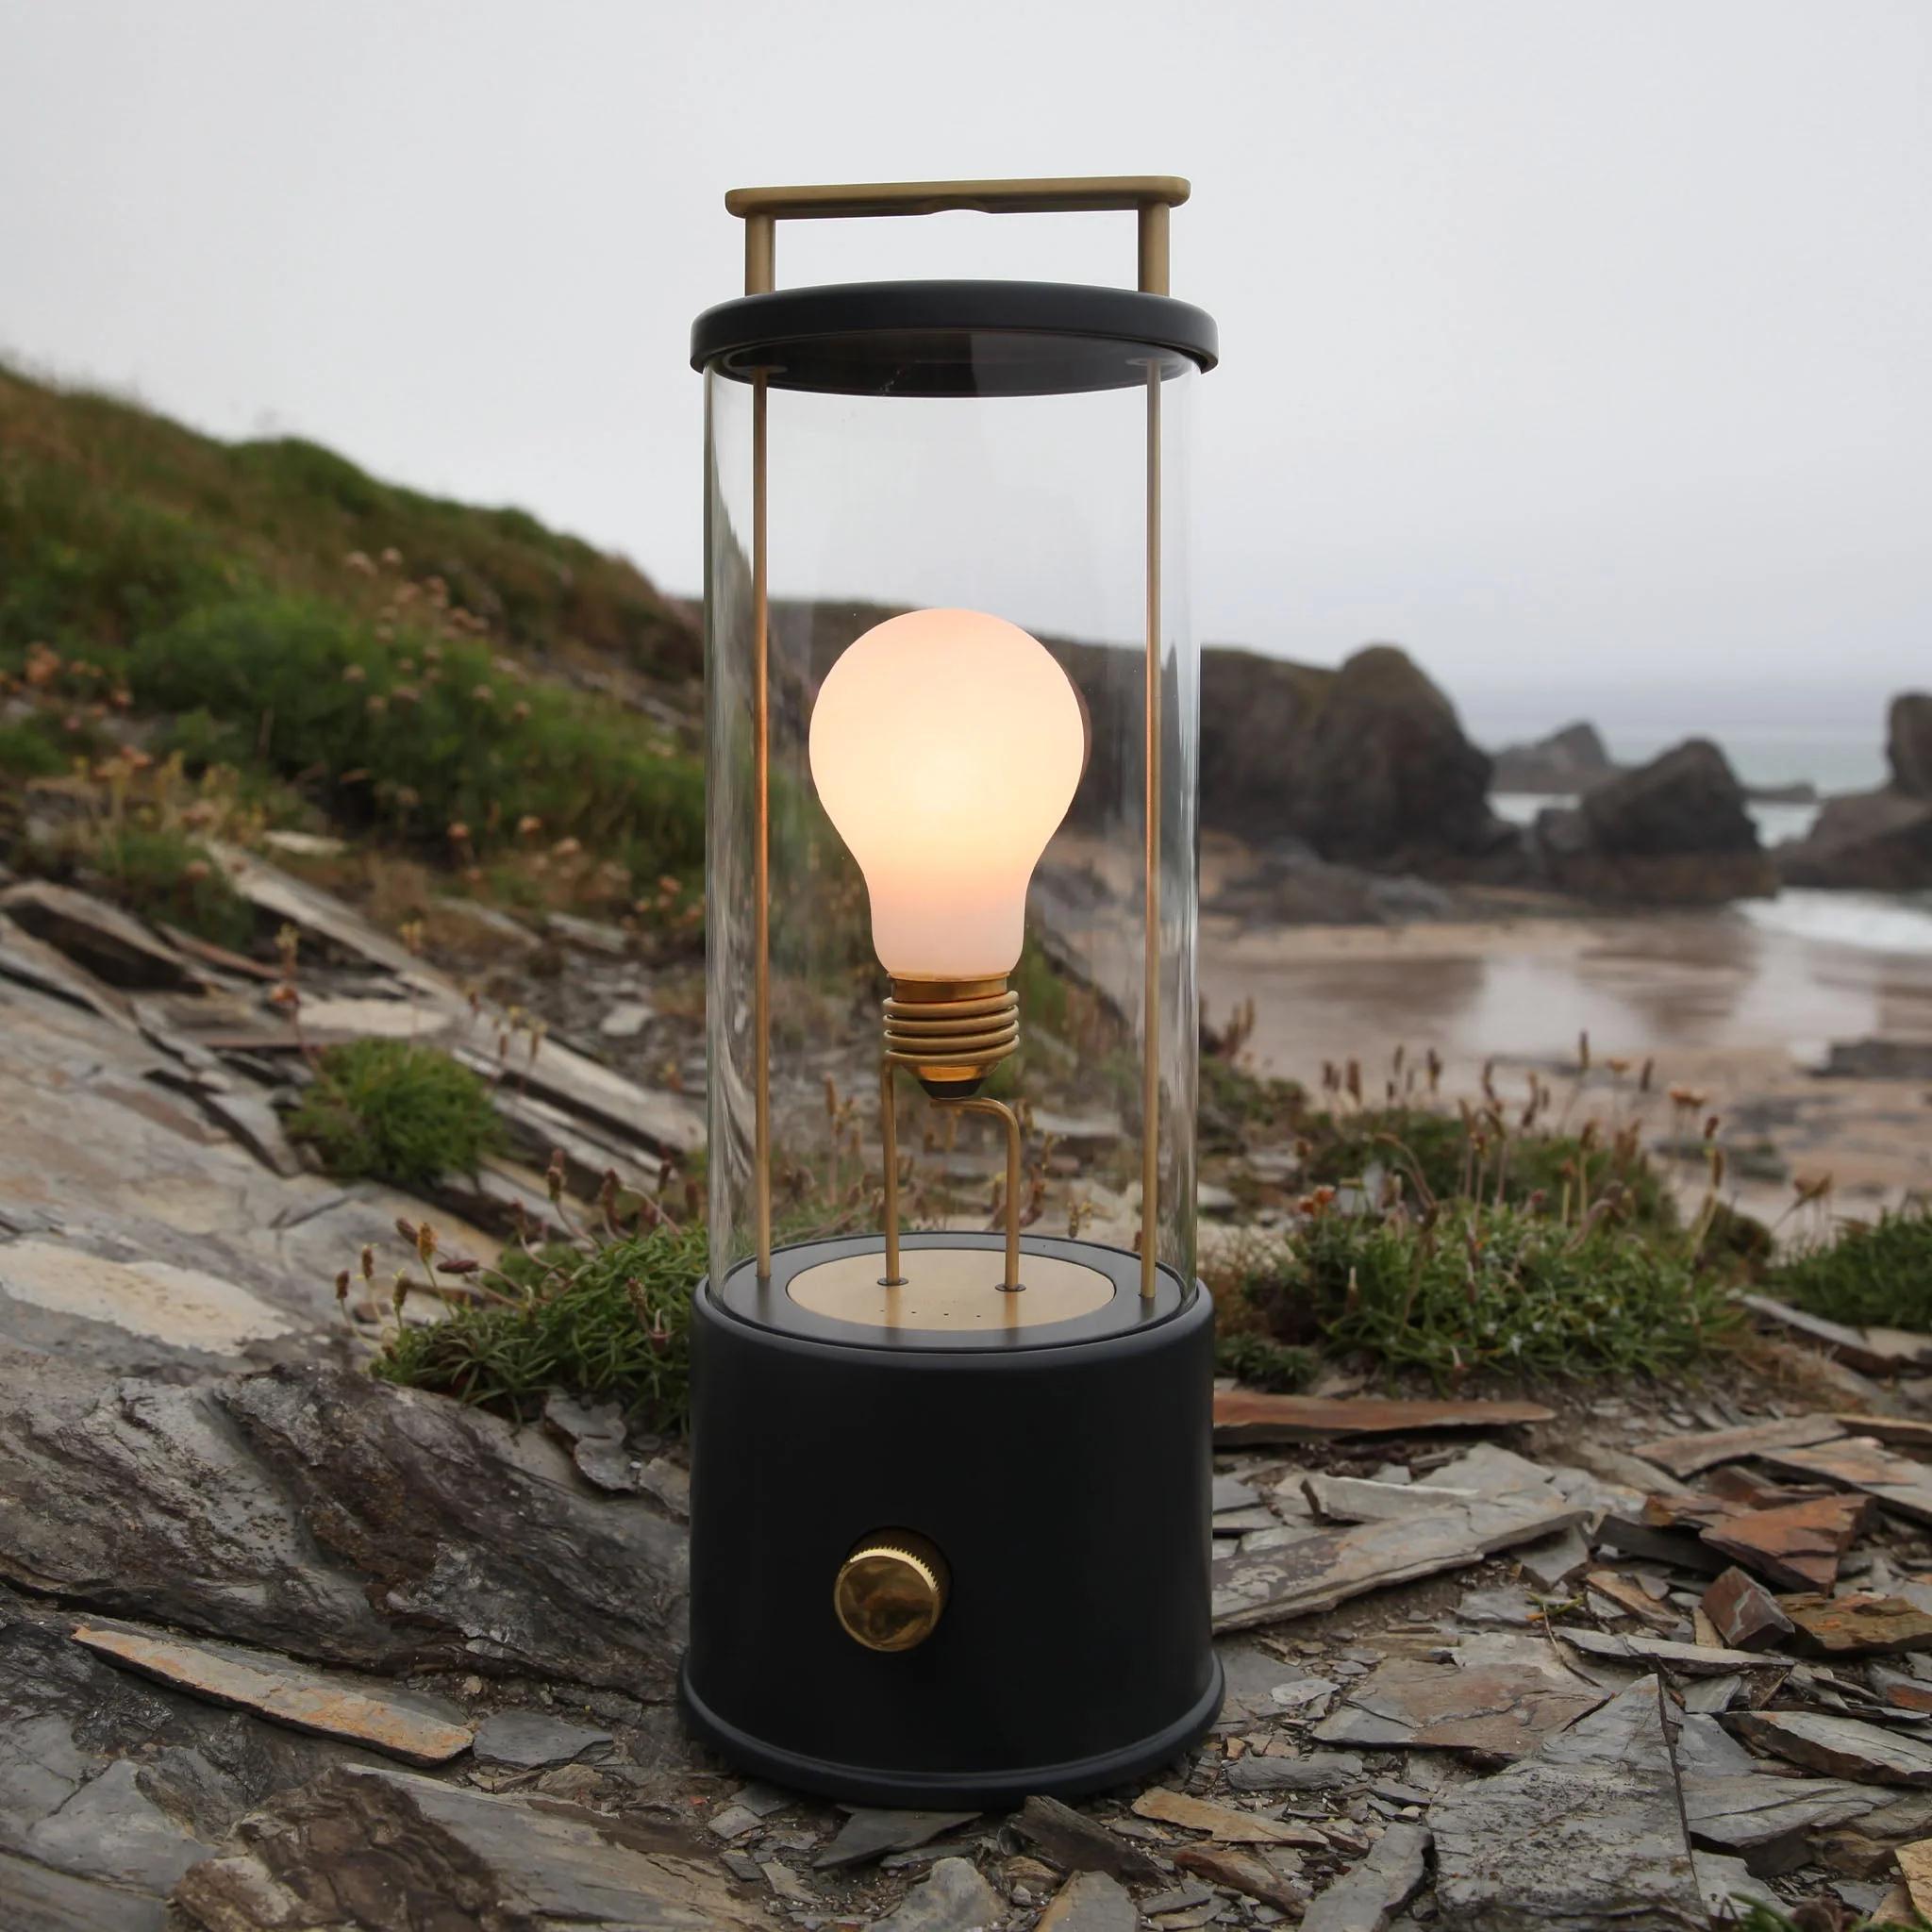 'The Muse' Portable Lamp by Farrow & Ball x Tala in Hackles Black.

Recalling the promise and grandeur of the British pleasure garden, The Muse mixes the classic lantern aesthetic with ultra-modern technology. Executed in brushed brass, custom